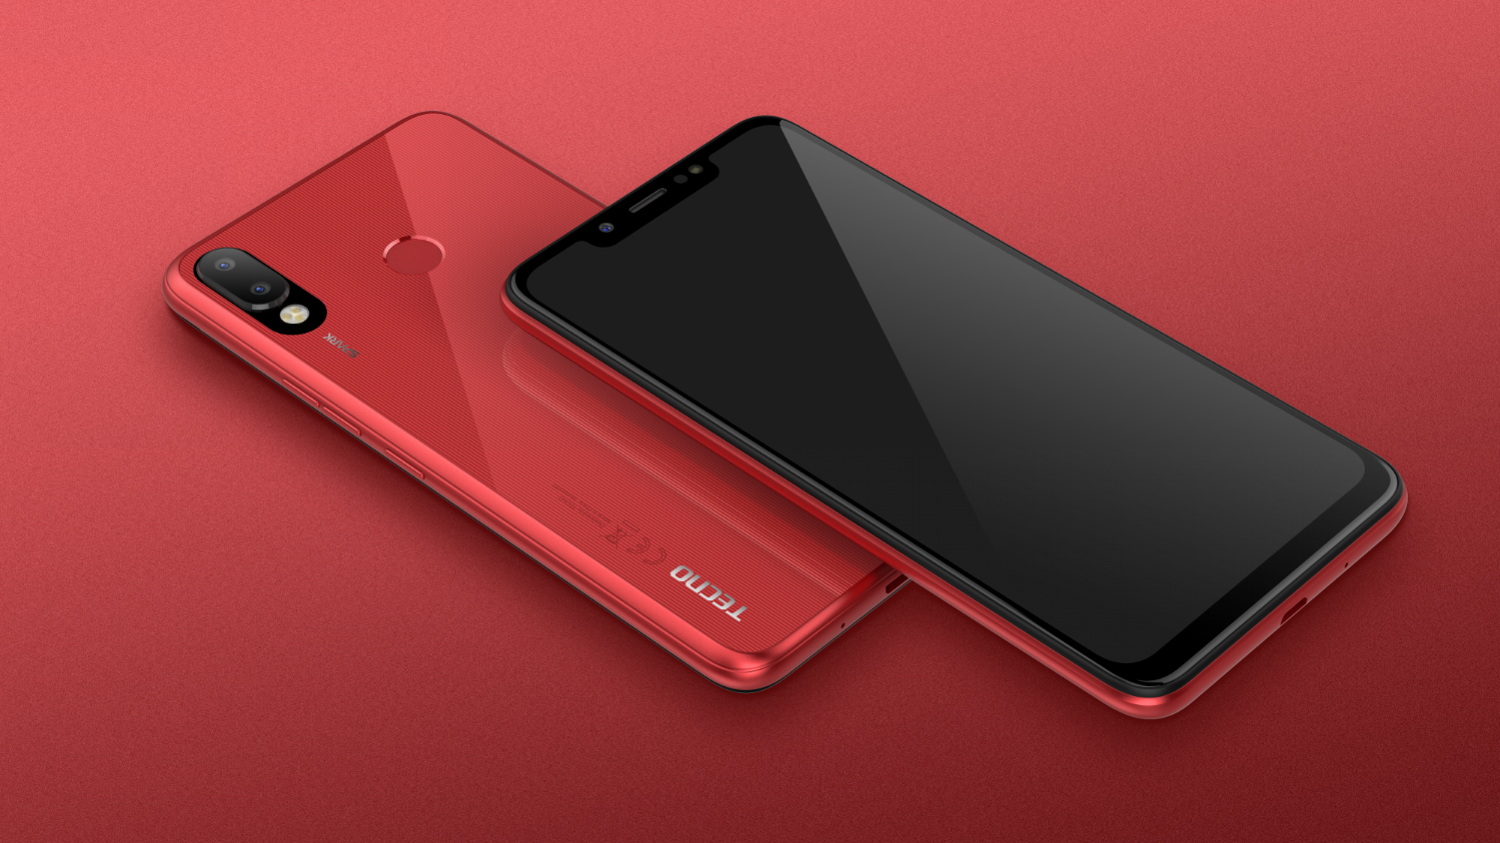 The TECNO Spark 3 which will be the successor of the Spark 2 comes readily available in the Bordeaux Red color option.